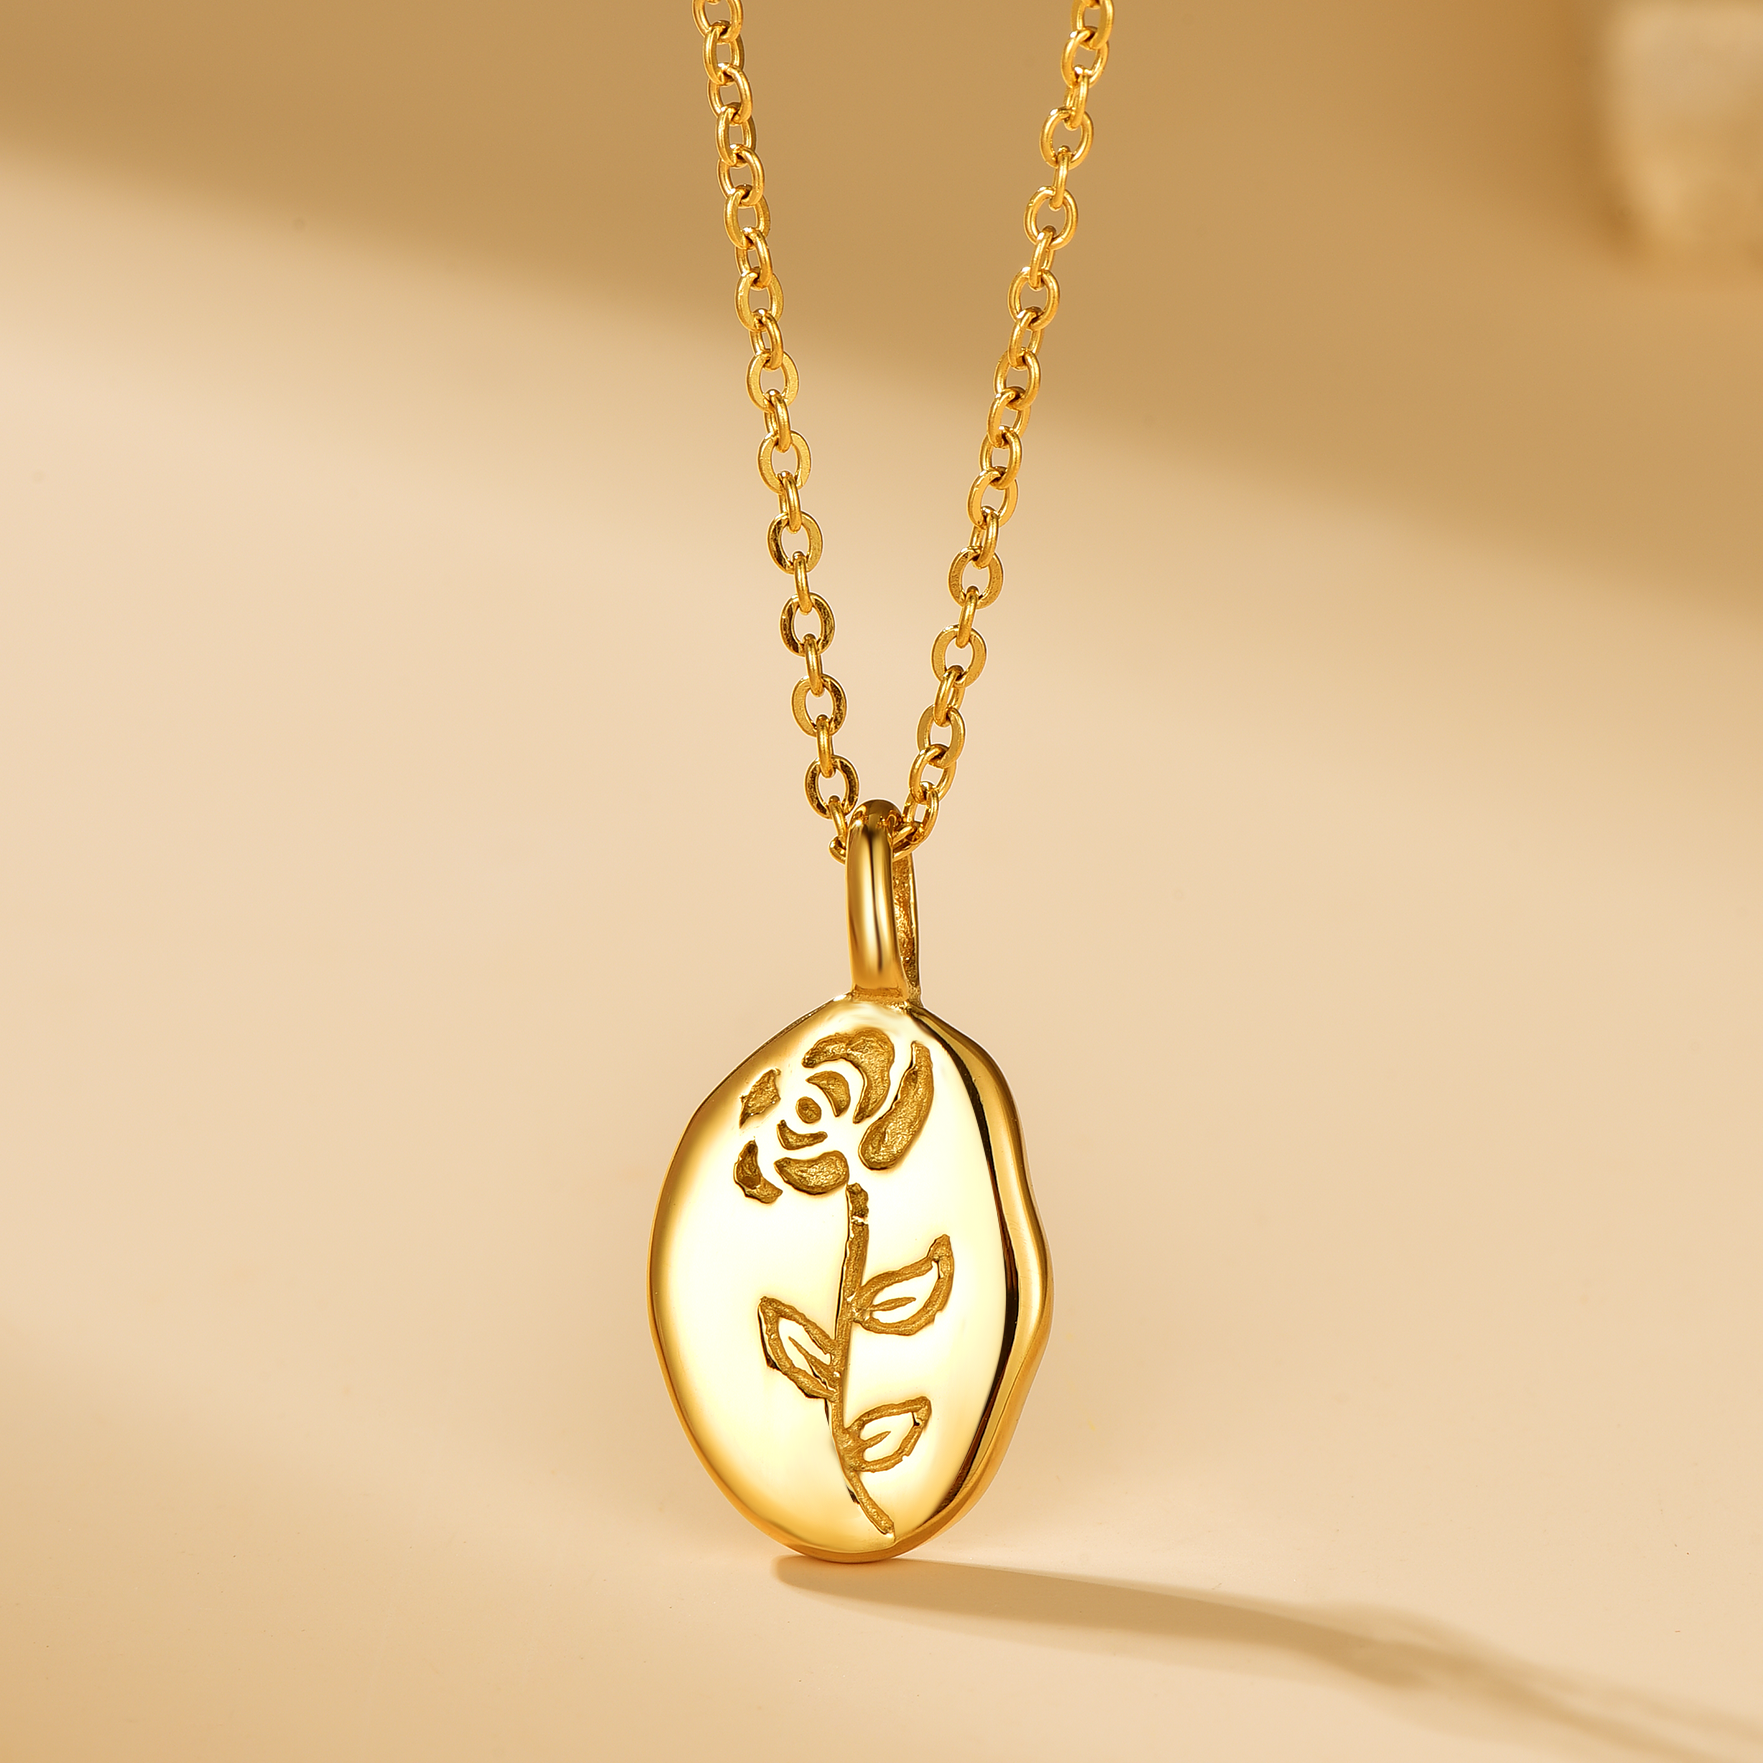 Rose Pendant Necklace - 18K Gold Plated - Hypoallergenic - Necklace - ONNNIII